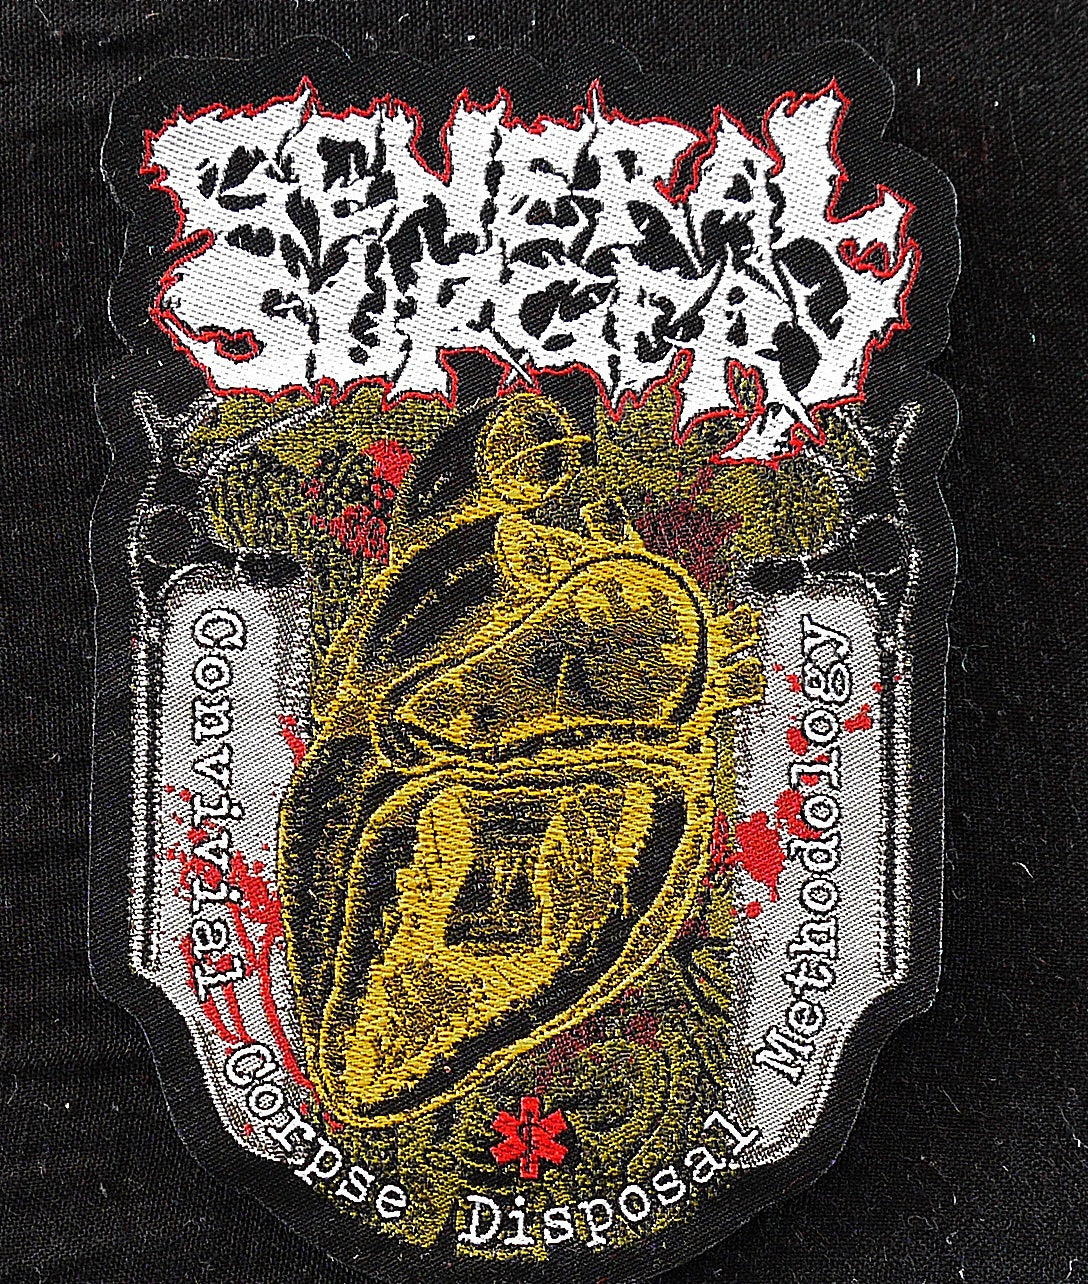 GENERAL SURGERY - Convivial Corpse Disposal Methodology Woven Patch